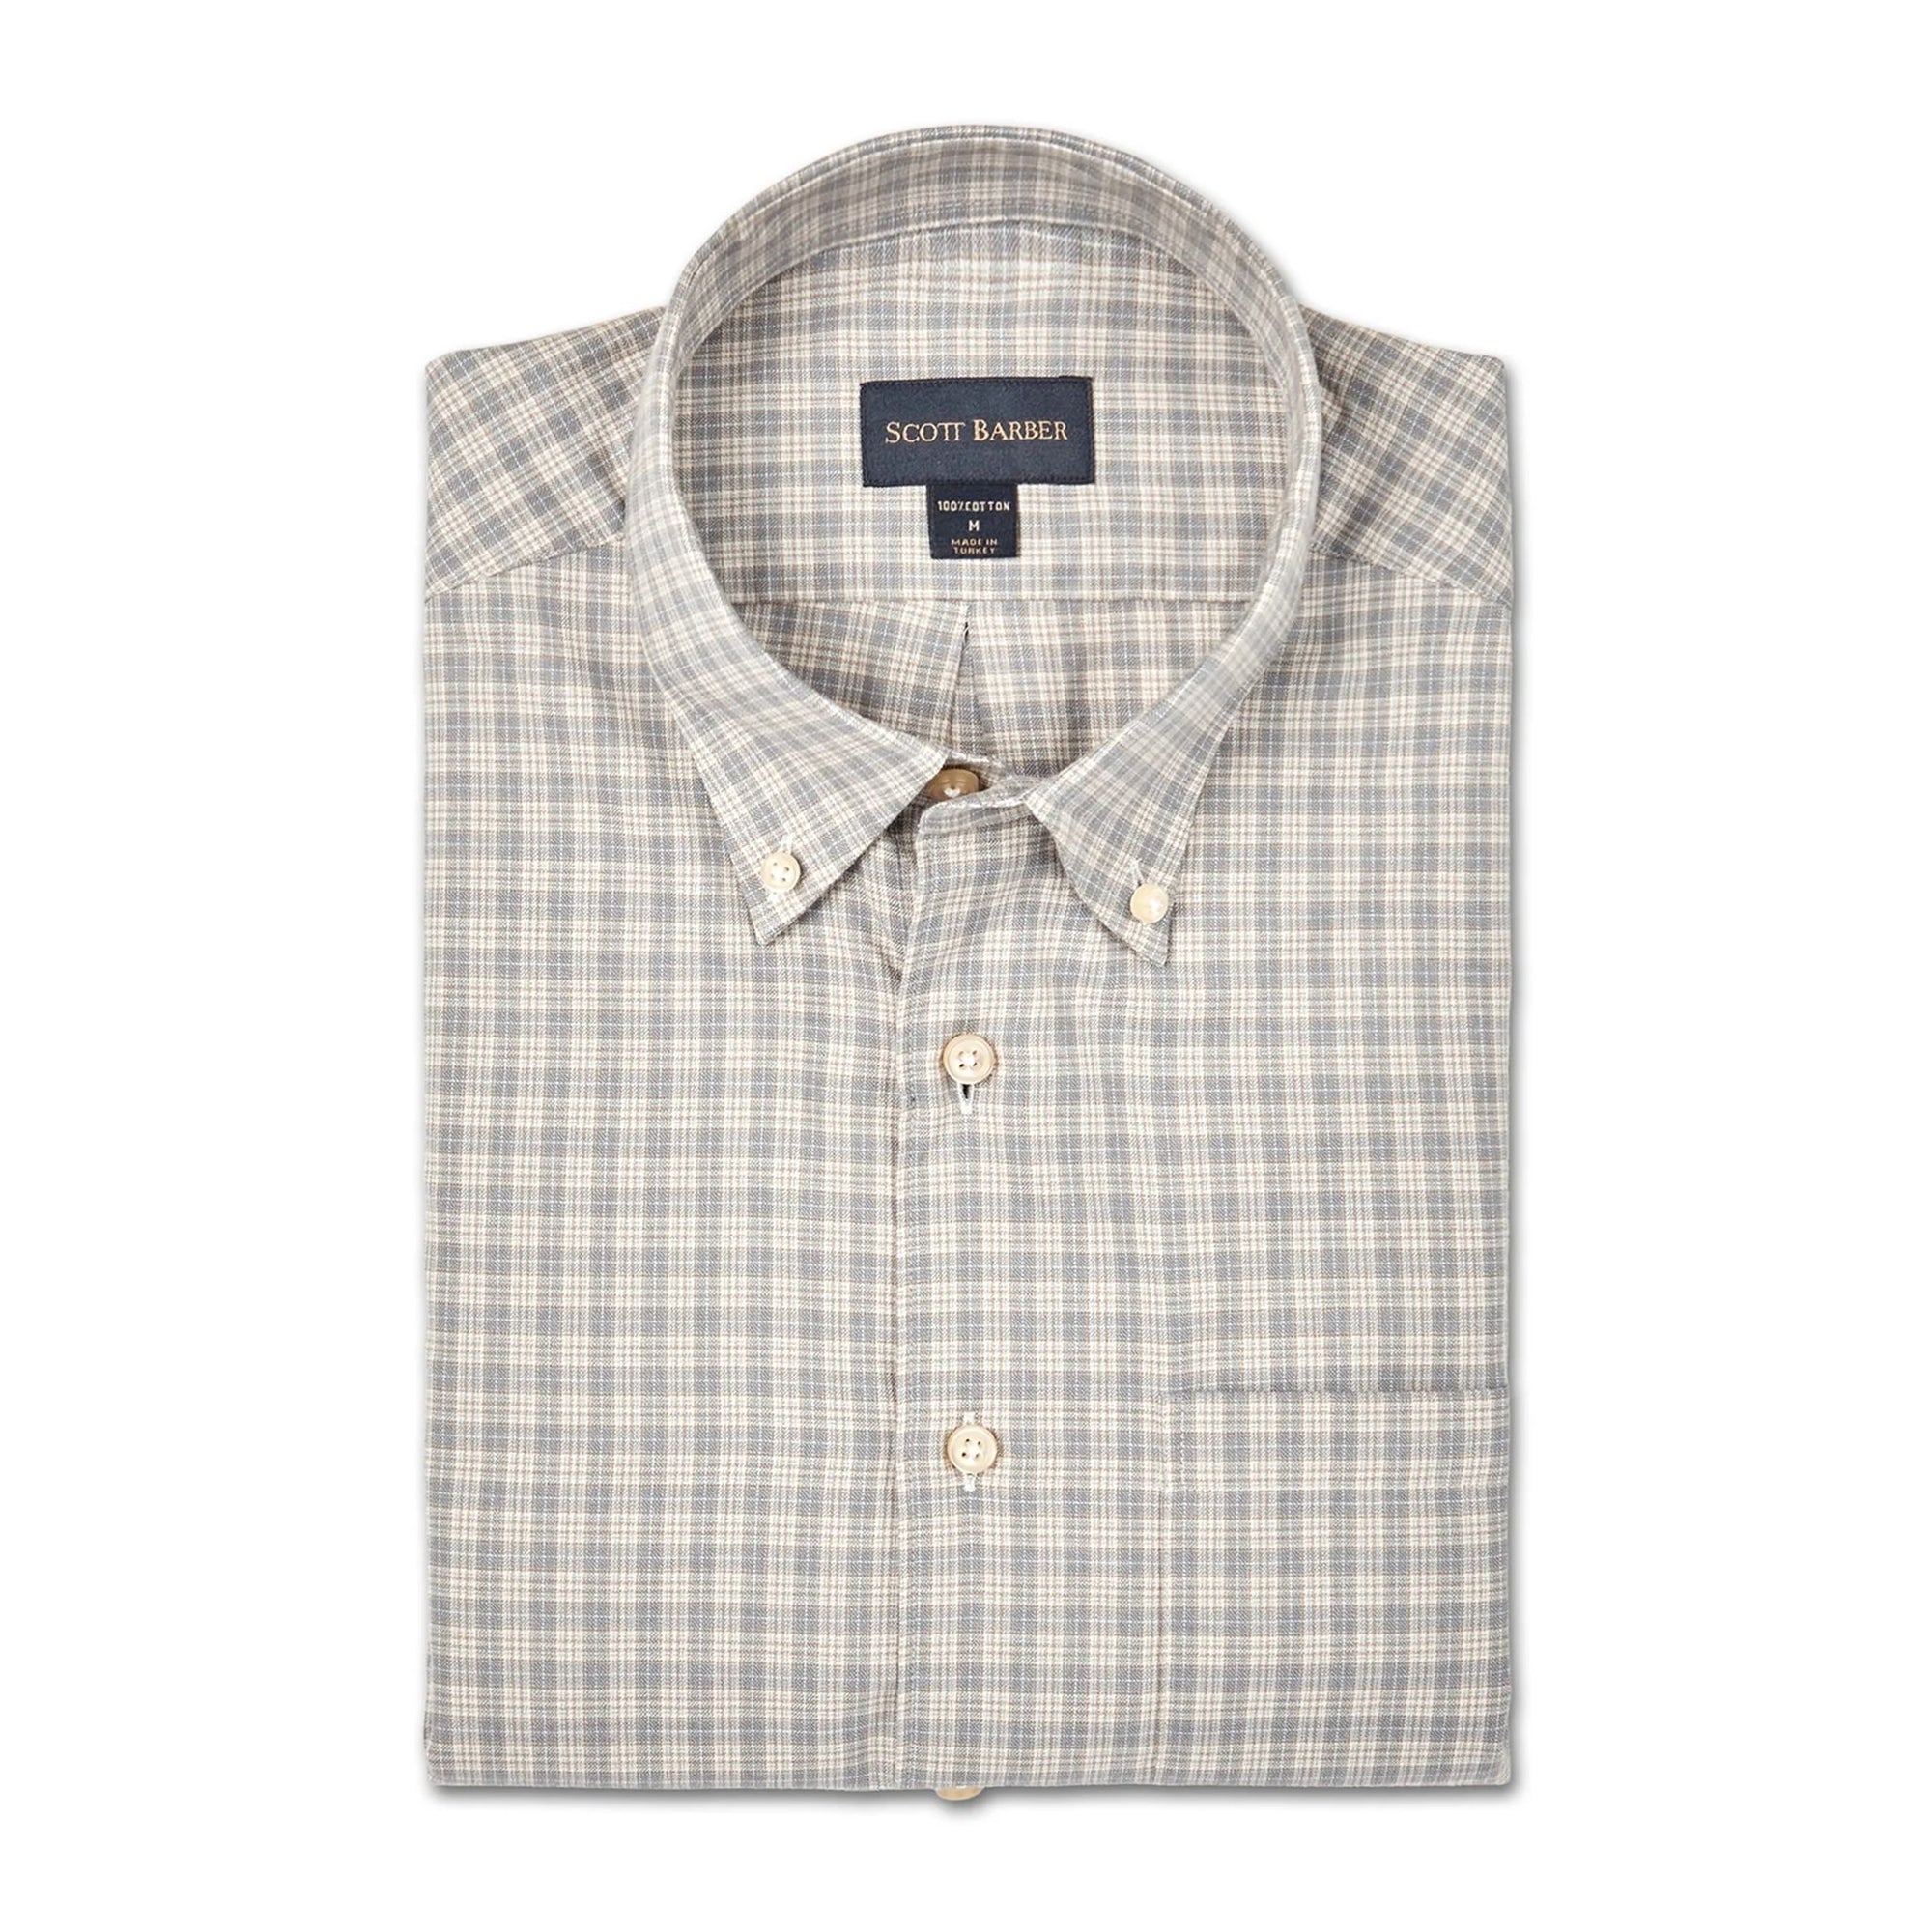 Glen Plaid Luxe Cotton Twill Sport Shirt in Khaki and Grey by Scott Barber